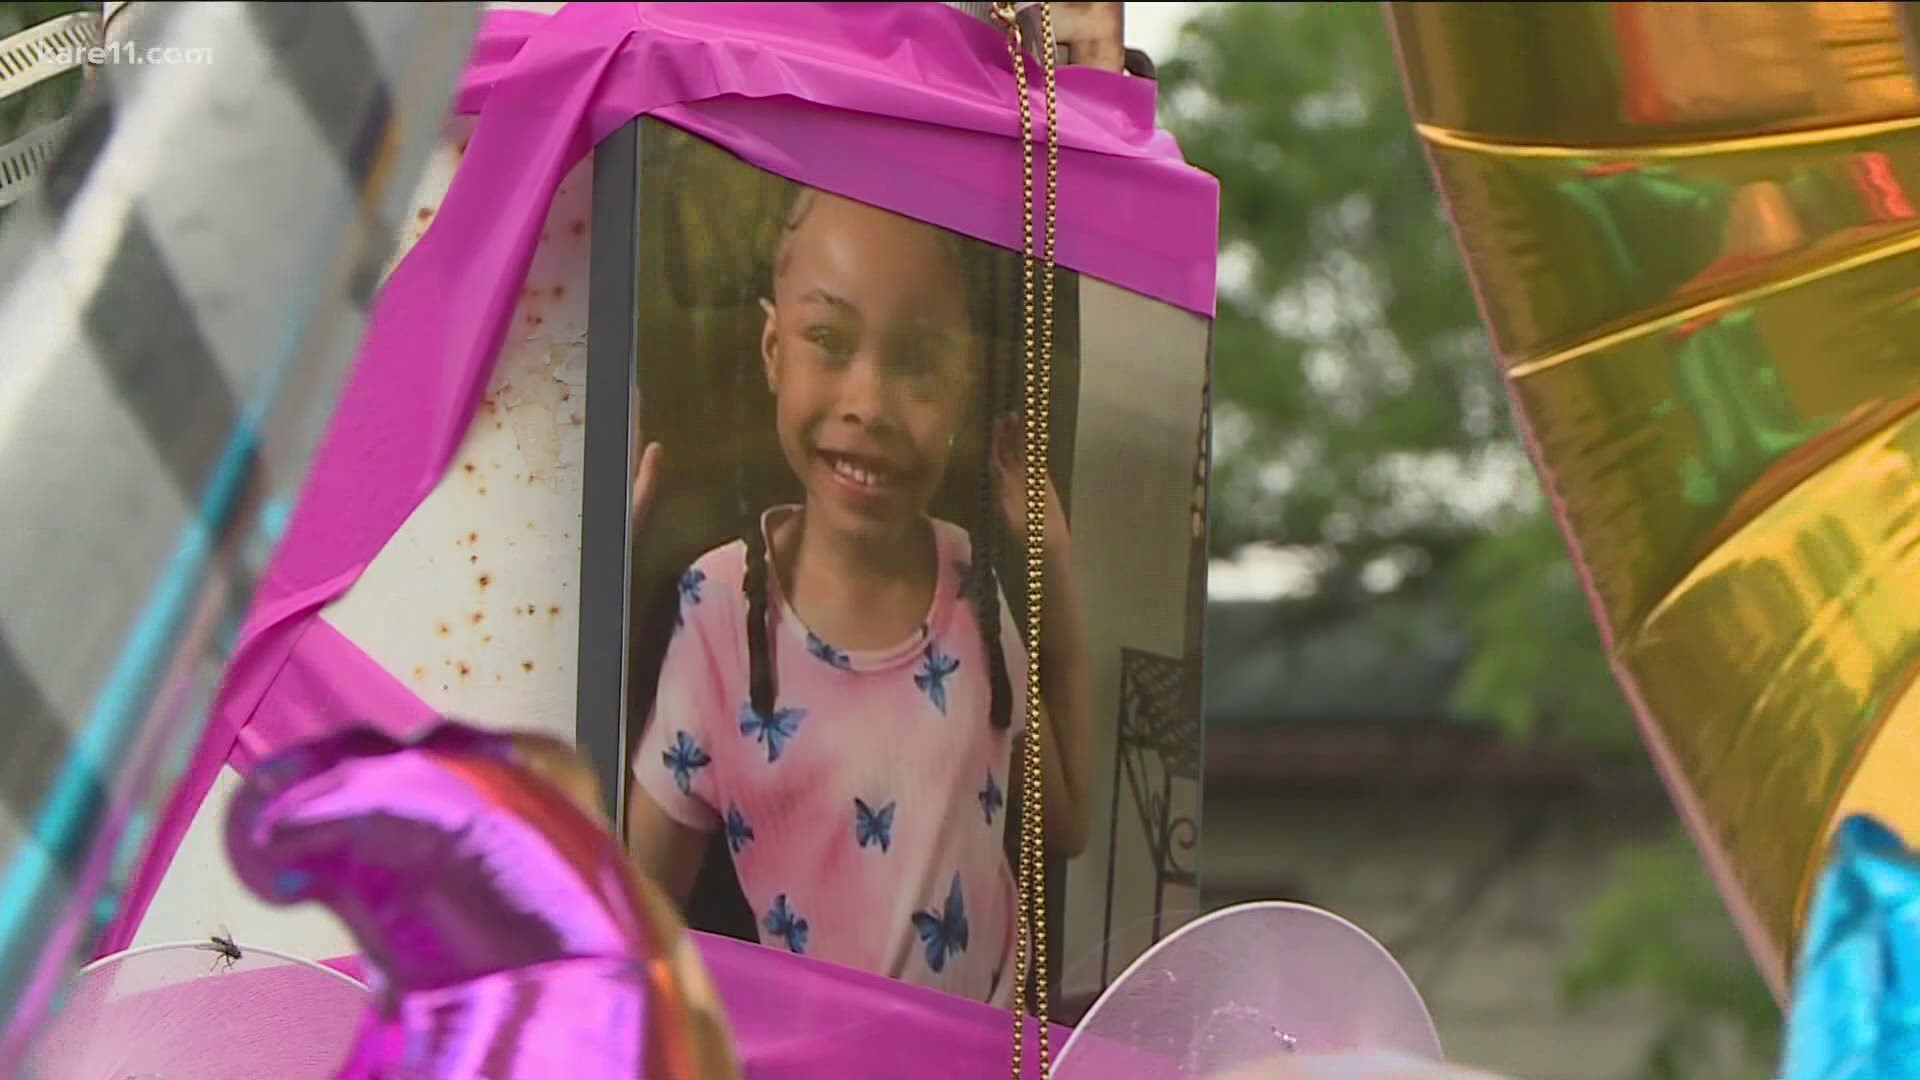 The little girl was shot and later died a few weeks ago in Minneapolis